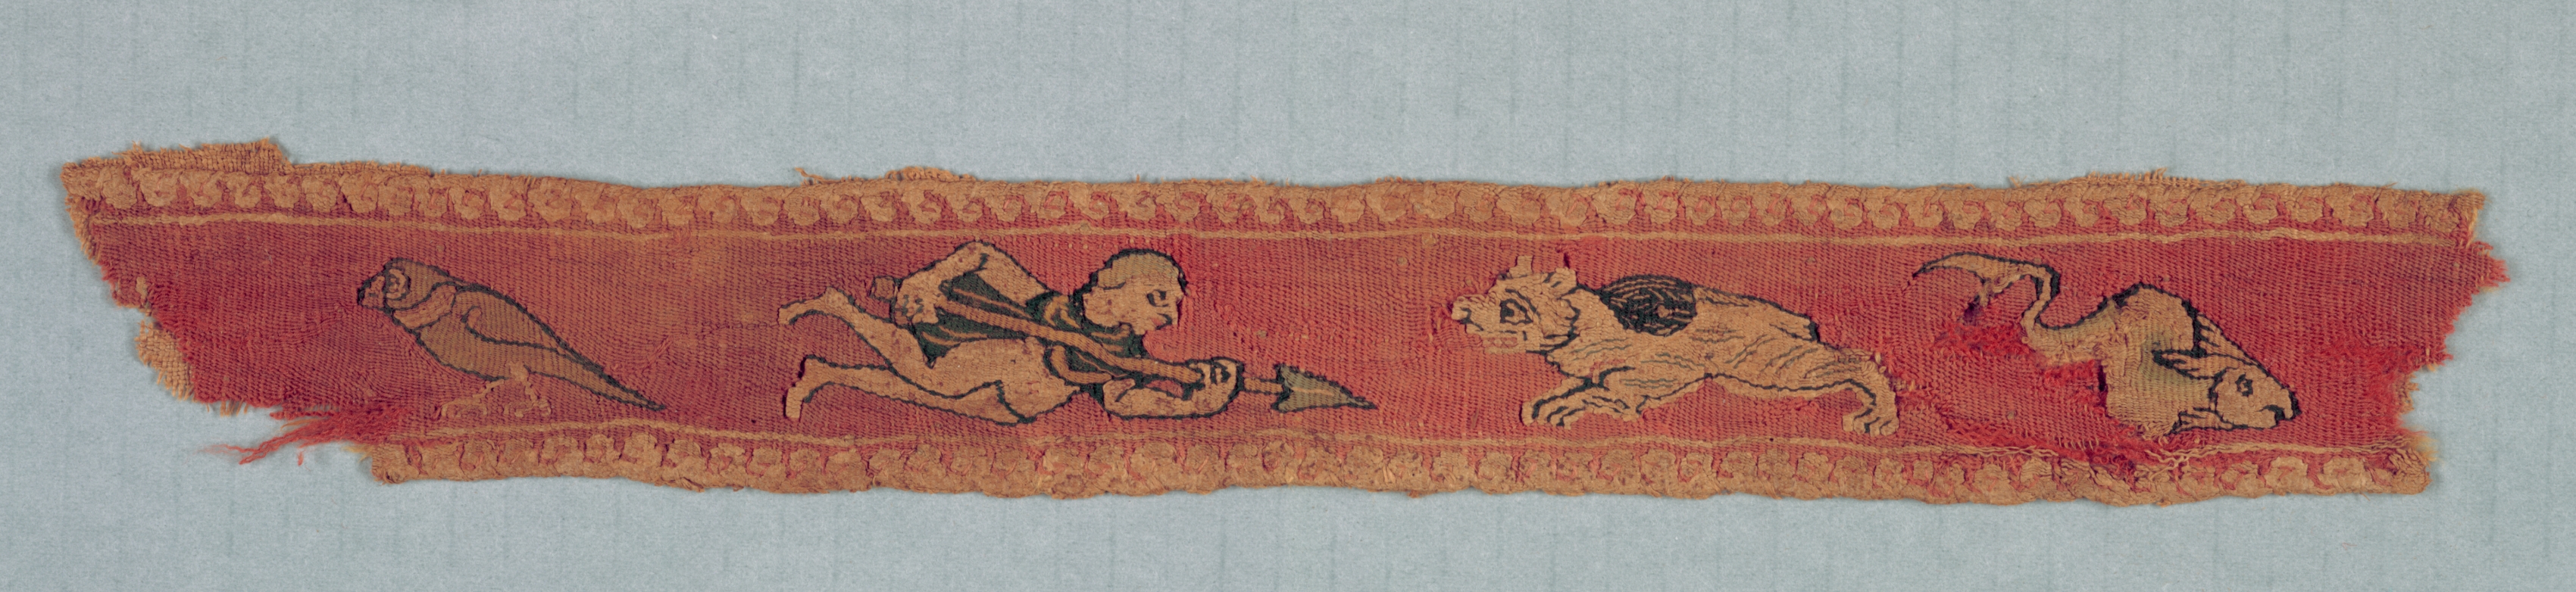 Fragment from a Child's Tunic: Clavus